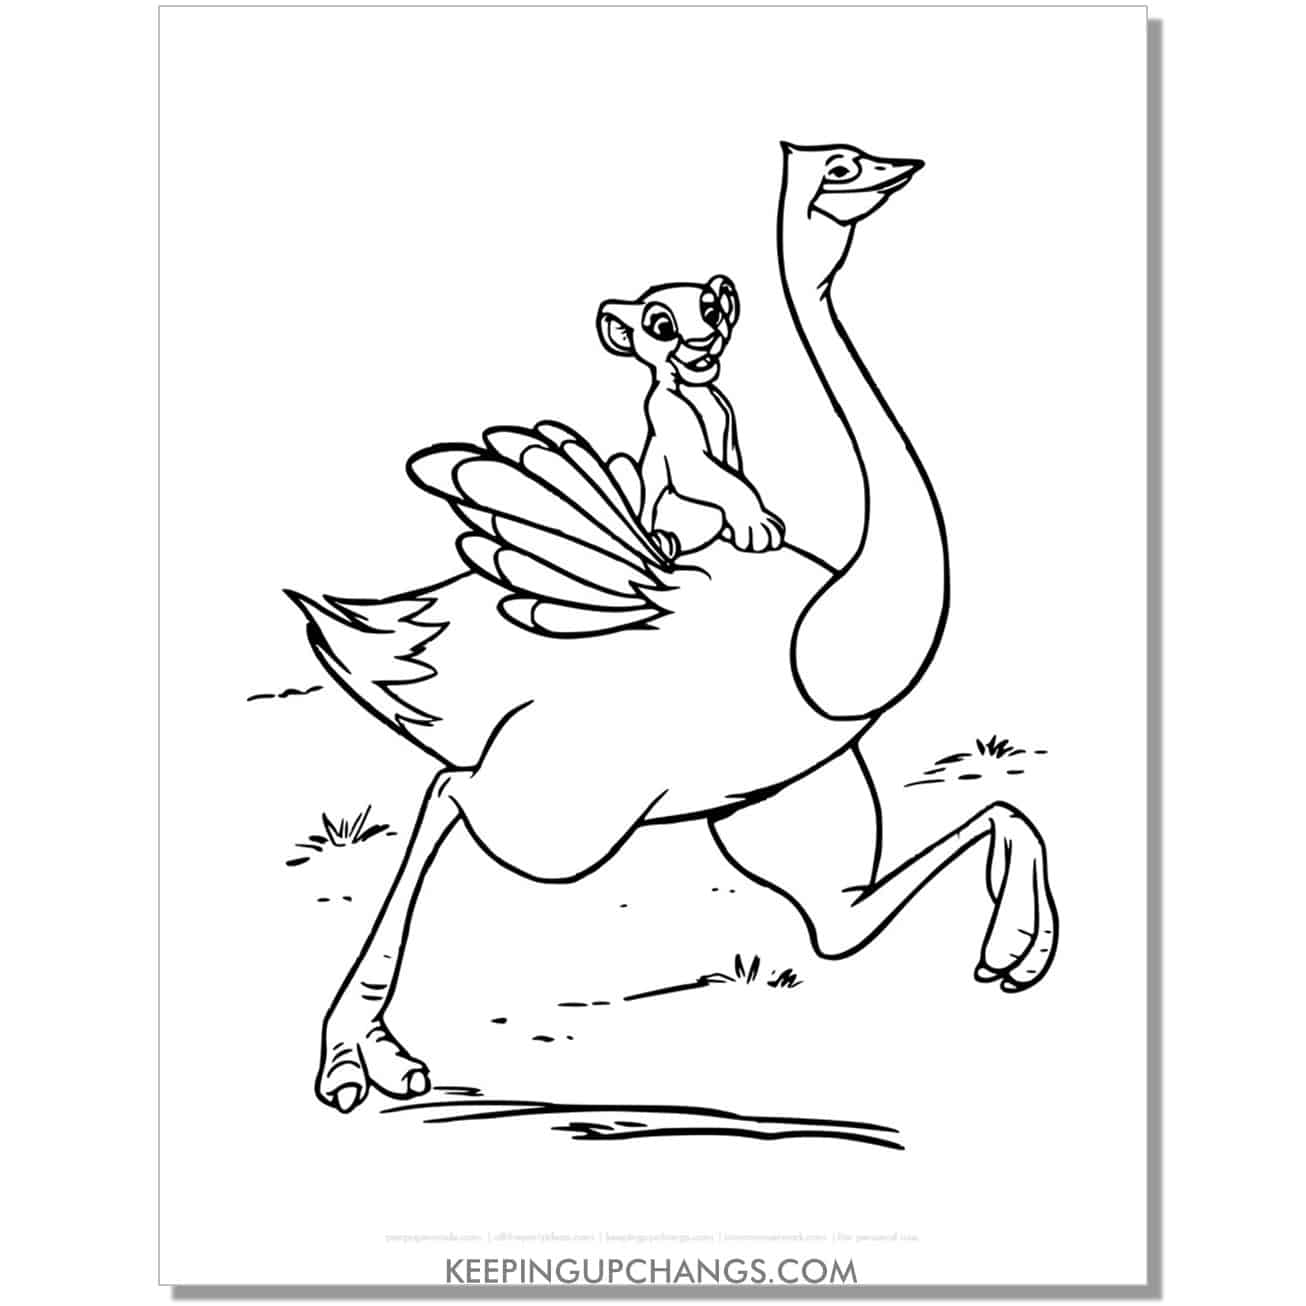 nala riding on ostrich lion king coloring page, sheet.